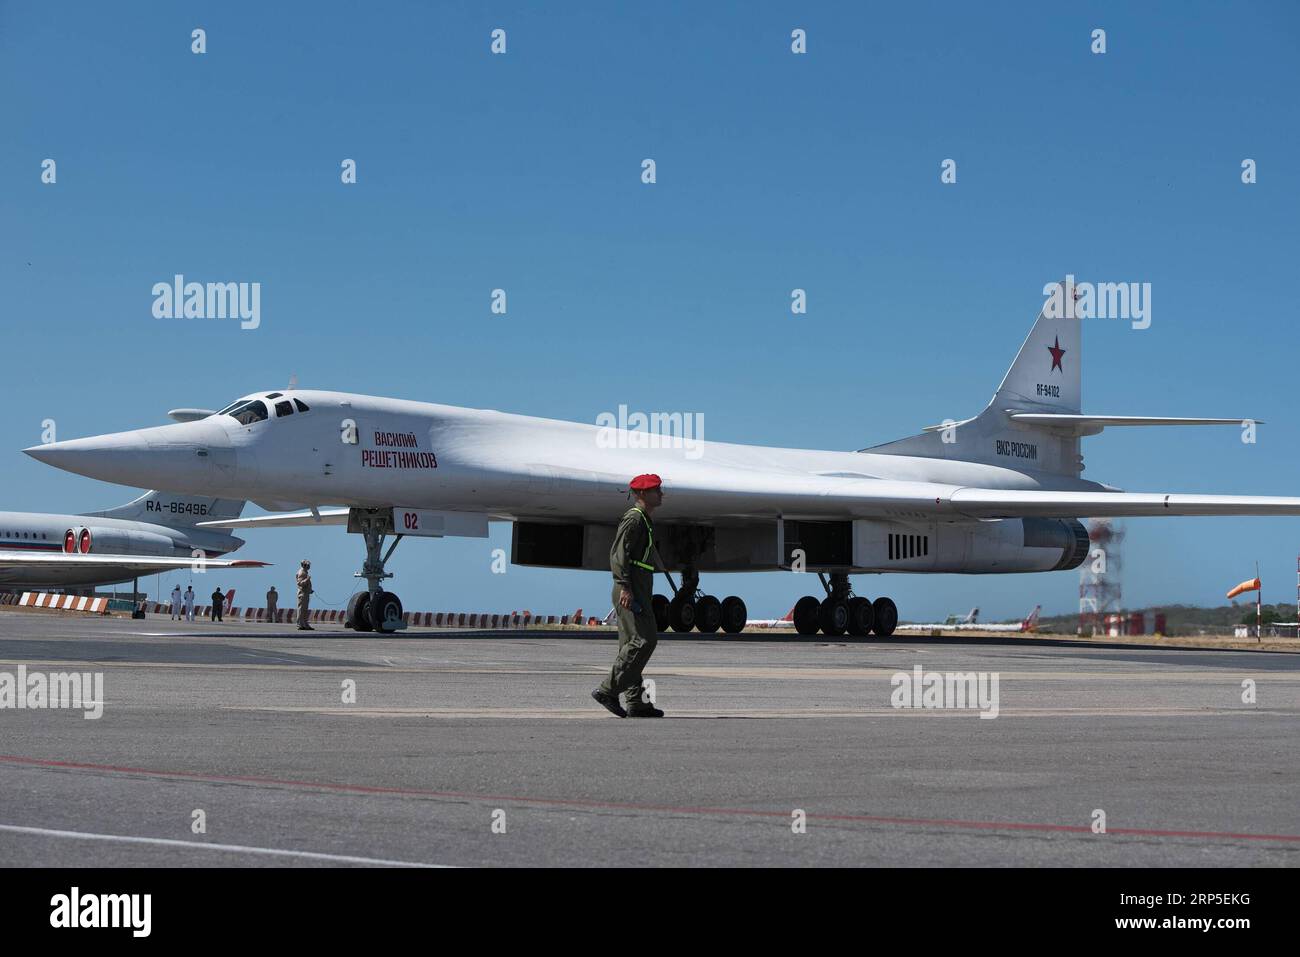 (181212) -- VARGAS, Dec. 12, 2018 -- Photo taken on Dec. 10, 2018 shows a Tu-160 strategic bomber at the Simon Bolivar International Airport, in Maiquetia, Vargas State, Venezuela. Two Russian Tupolev Tu-160 strategic bombers have arrived in Venezuela, the Russian defense ministry said in a statement. According to Russian news report, Venezuelan Defense Minister Vladimir Padrino Lopez welcomed the Russian warplanes, saying that Venezuela is getting prepared to defend itself when needed and the country will do it with the friends who advocate respect-based relations between states. ) VENEZUELA- Stock Photo